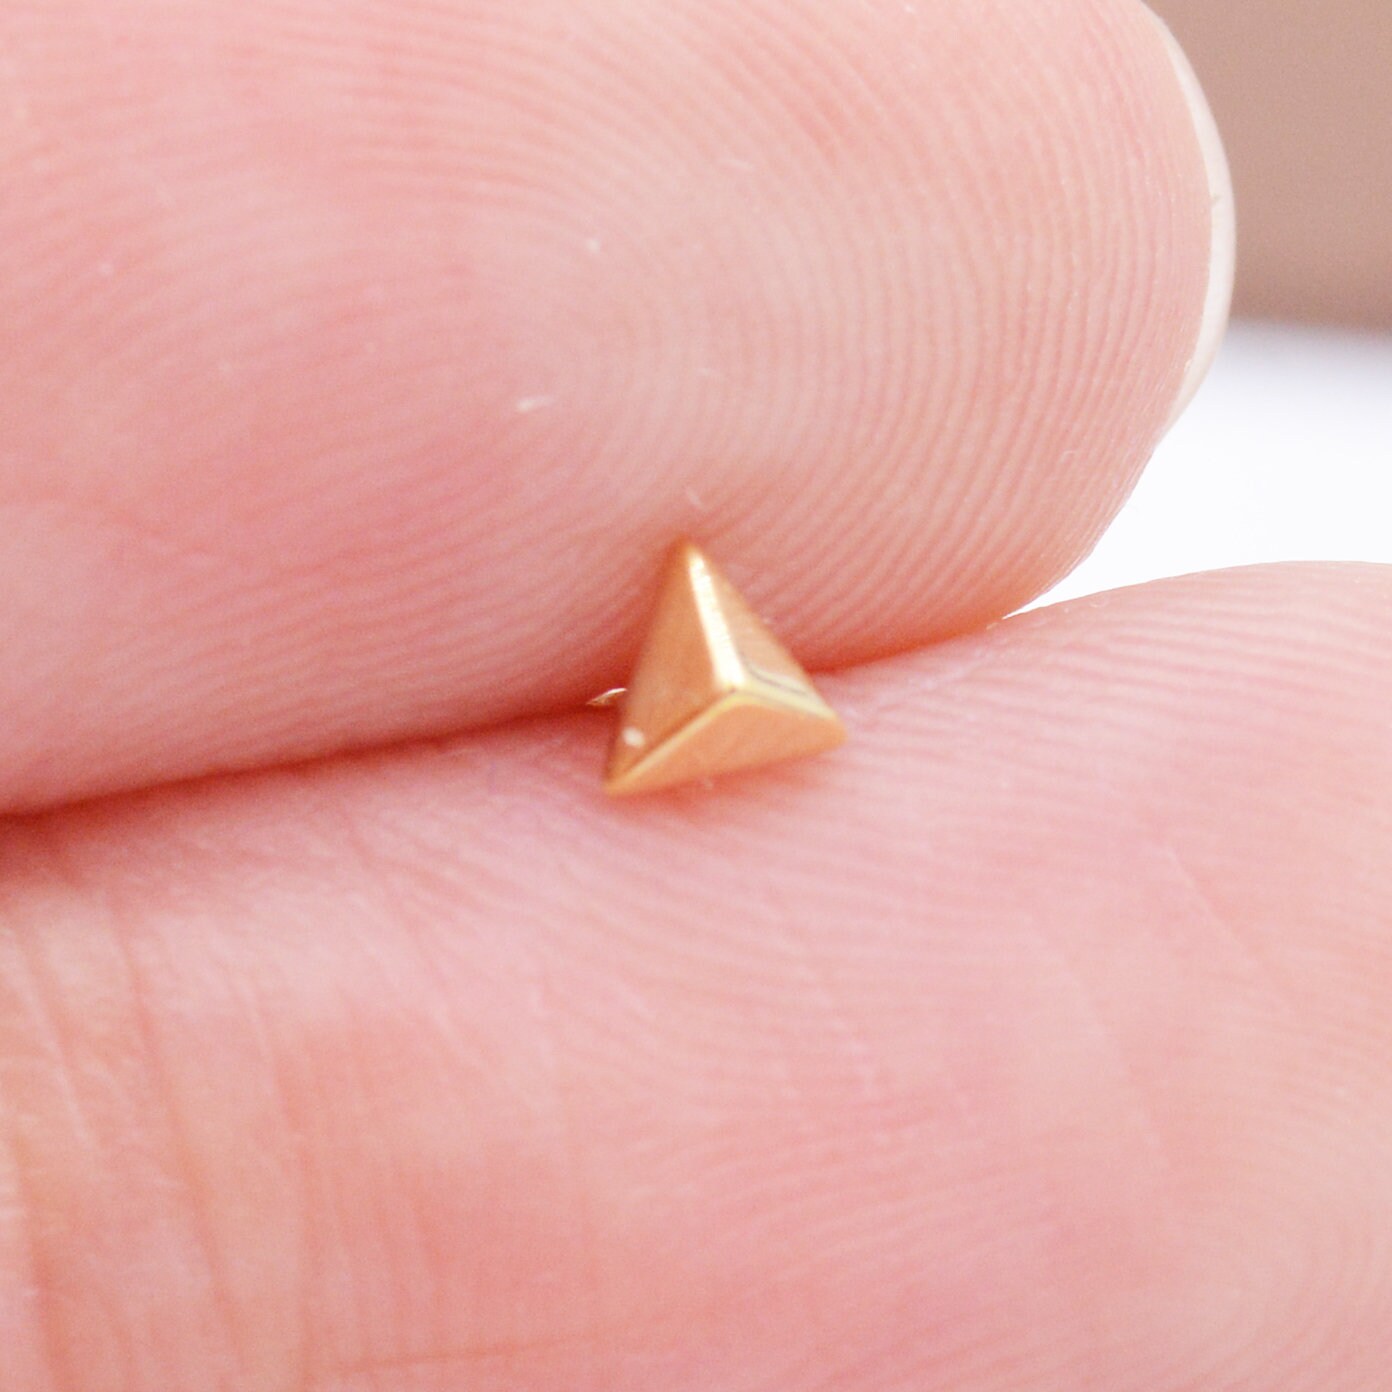 Extra Tiny Pyramid Spike Stud Earrings in Sterling Silver, Teeny Weeny Triangle Stud, Silver or Gold